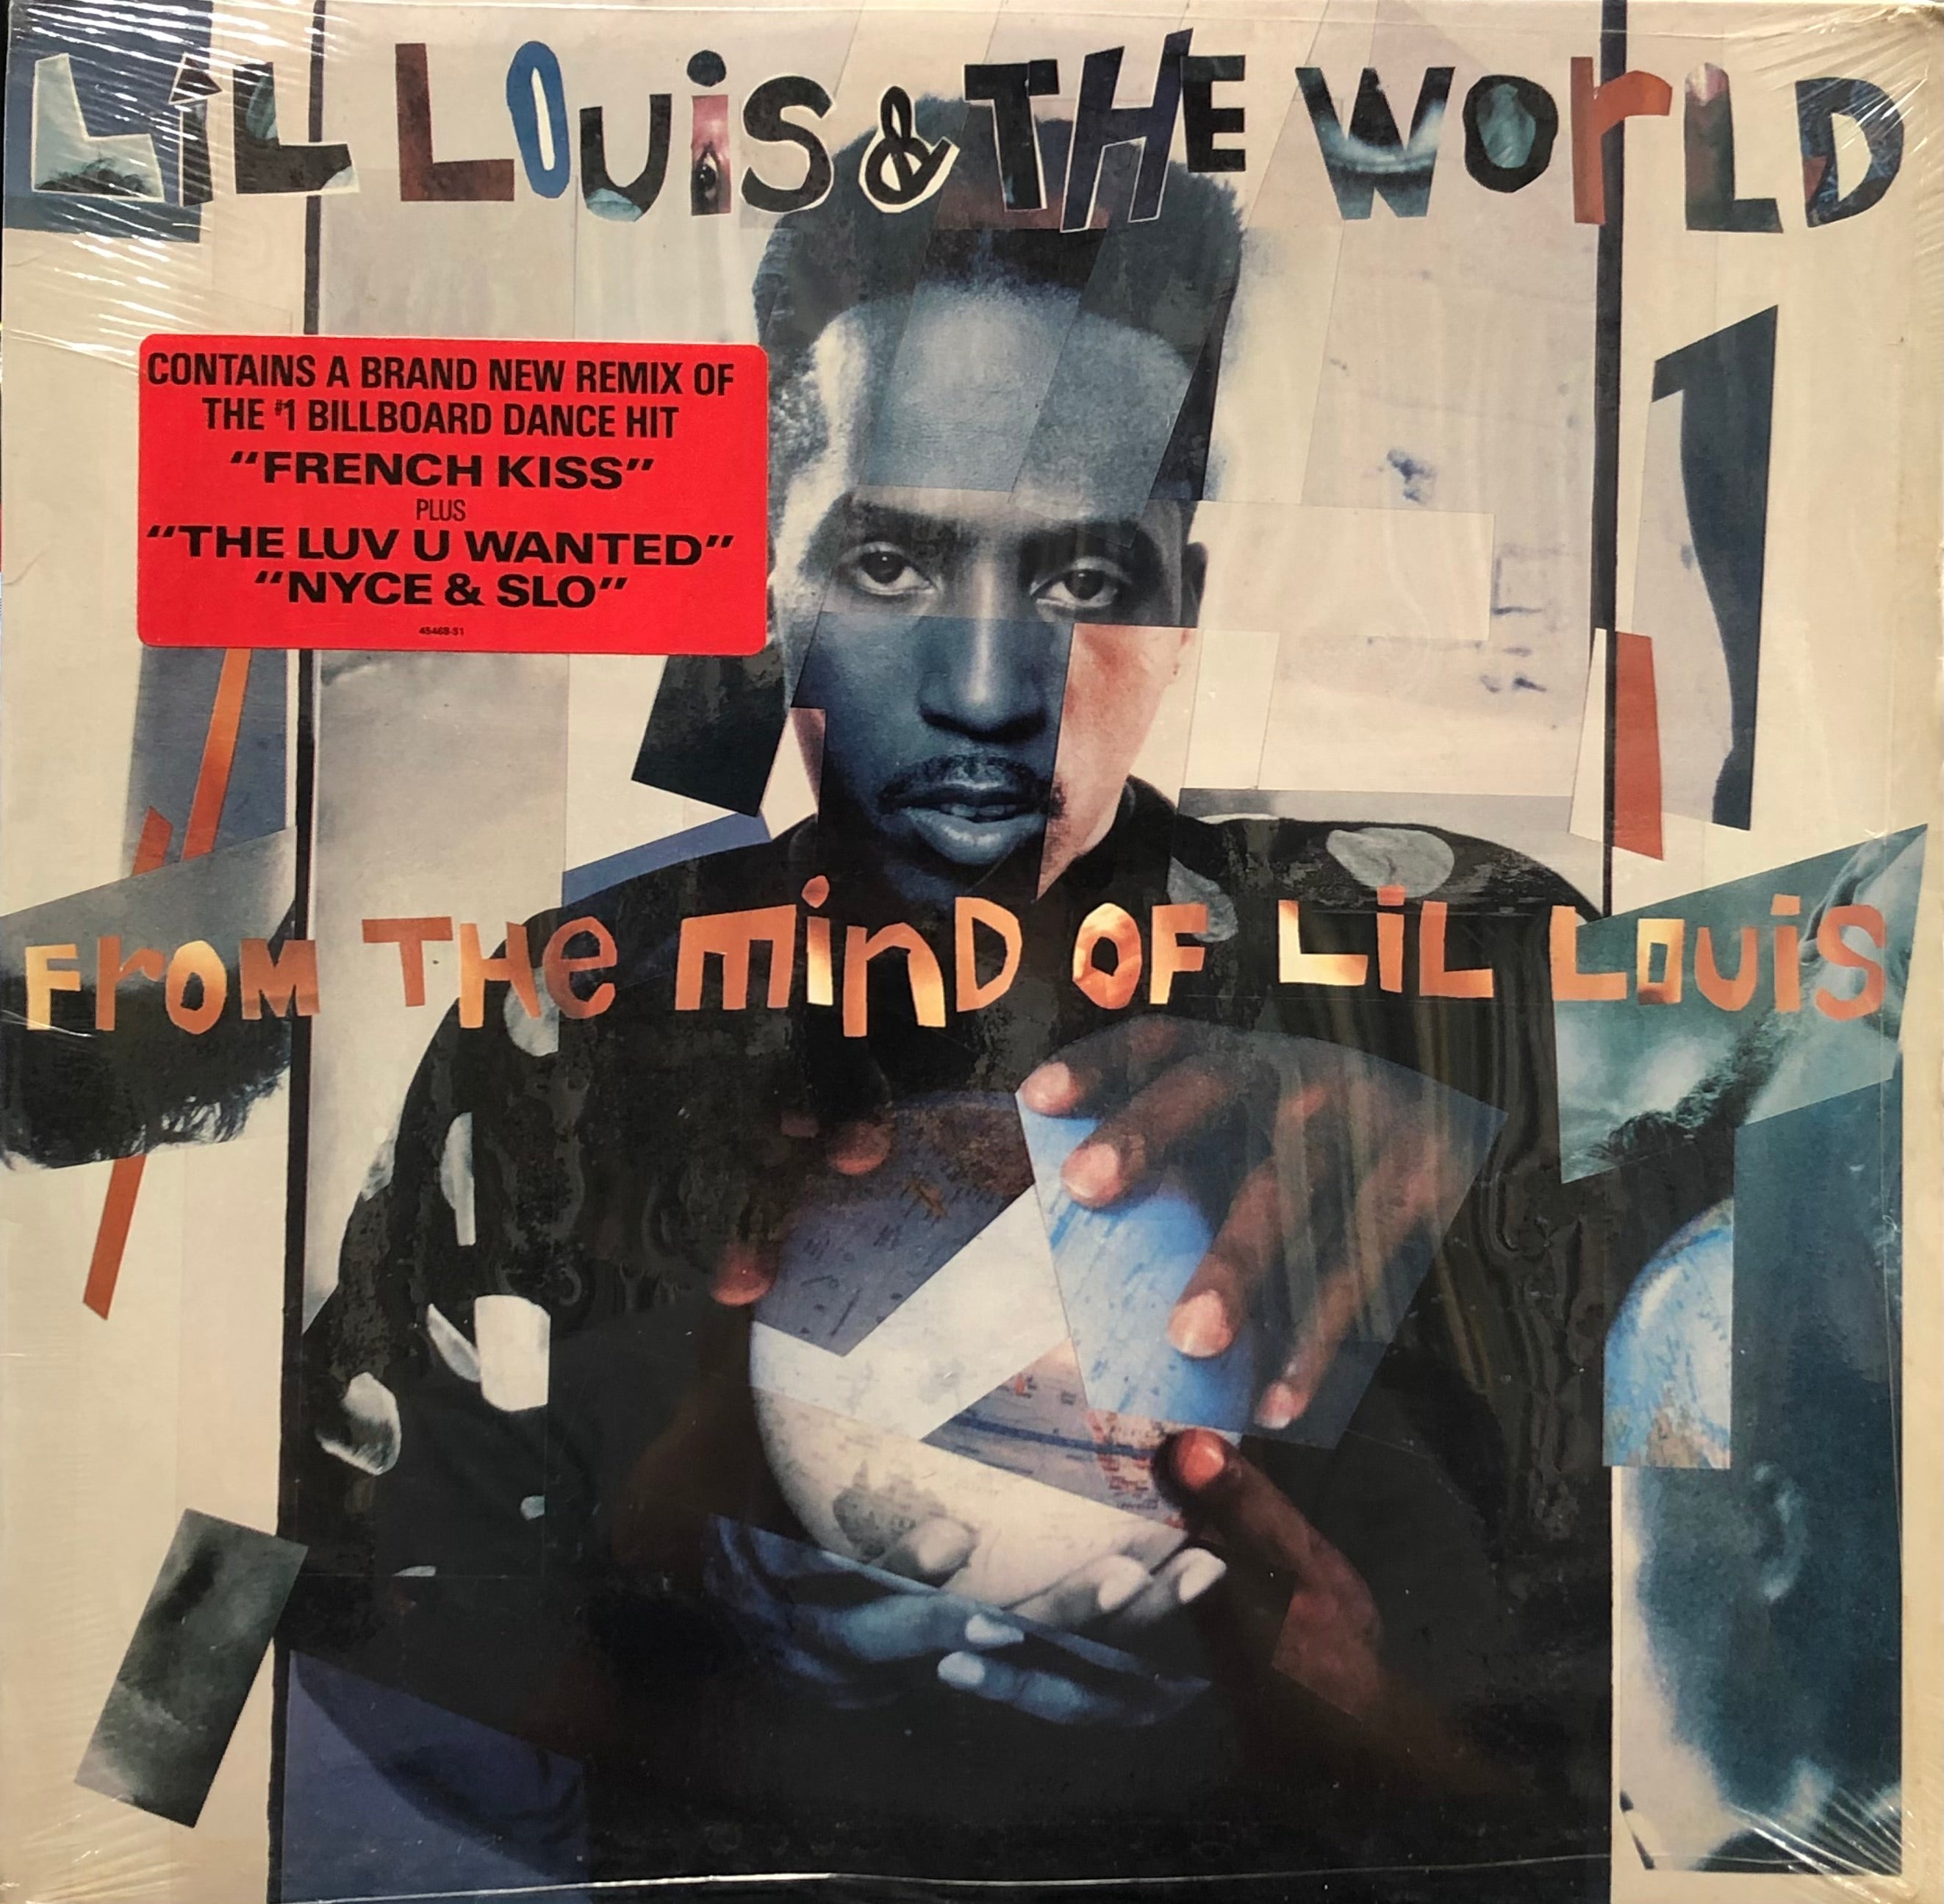 LIL' LOUIS & THE WORLD / From The Mind Of Lil Louis (E 45468 